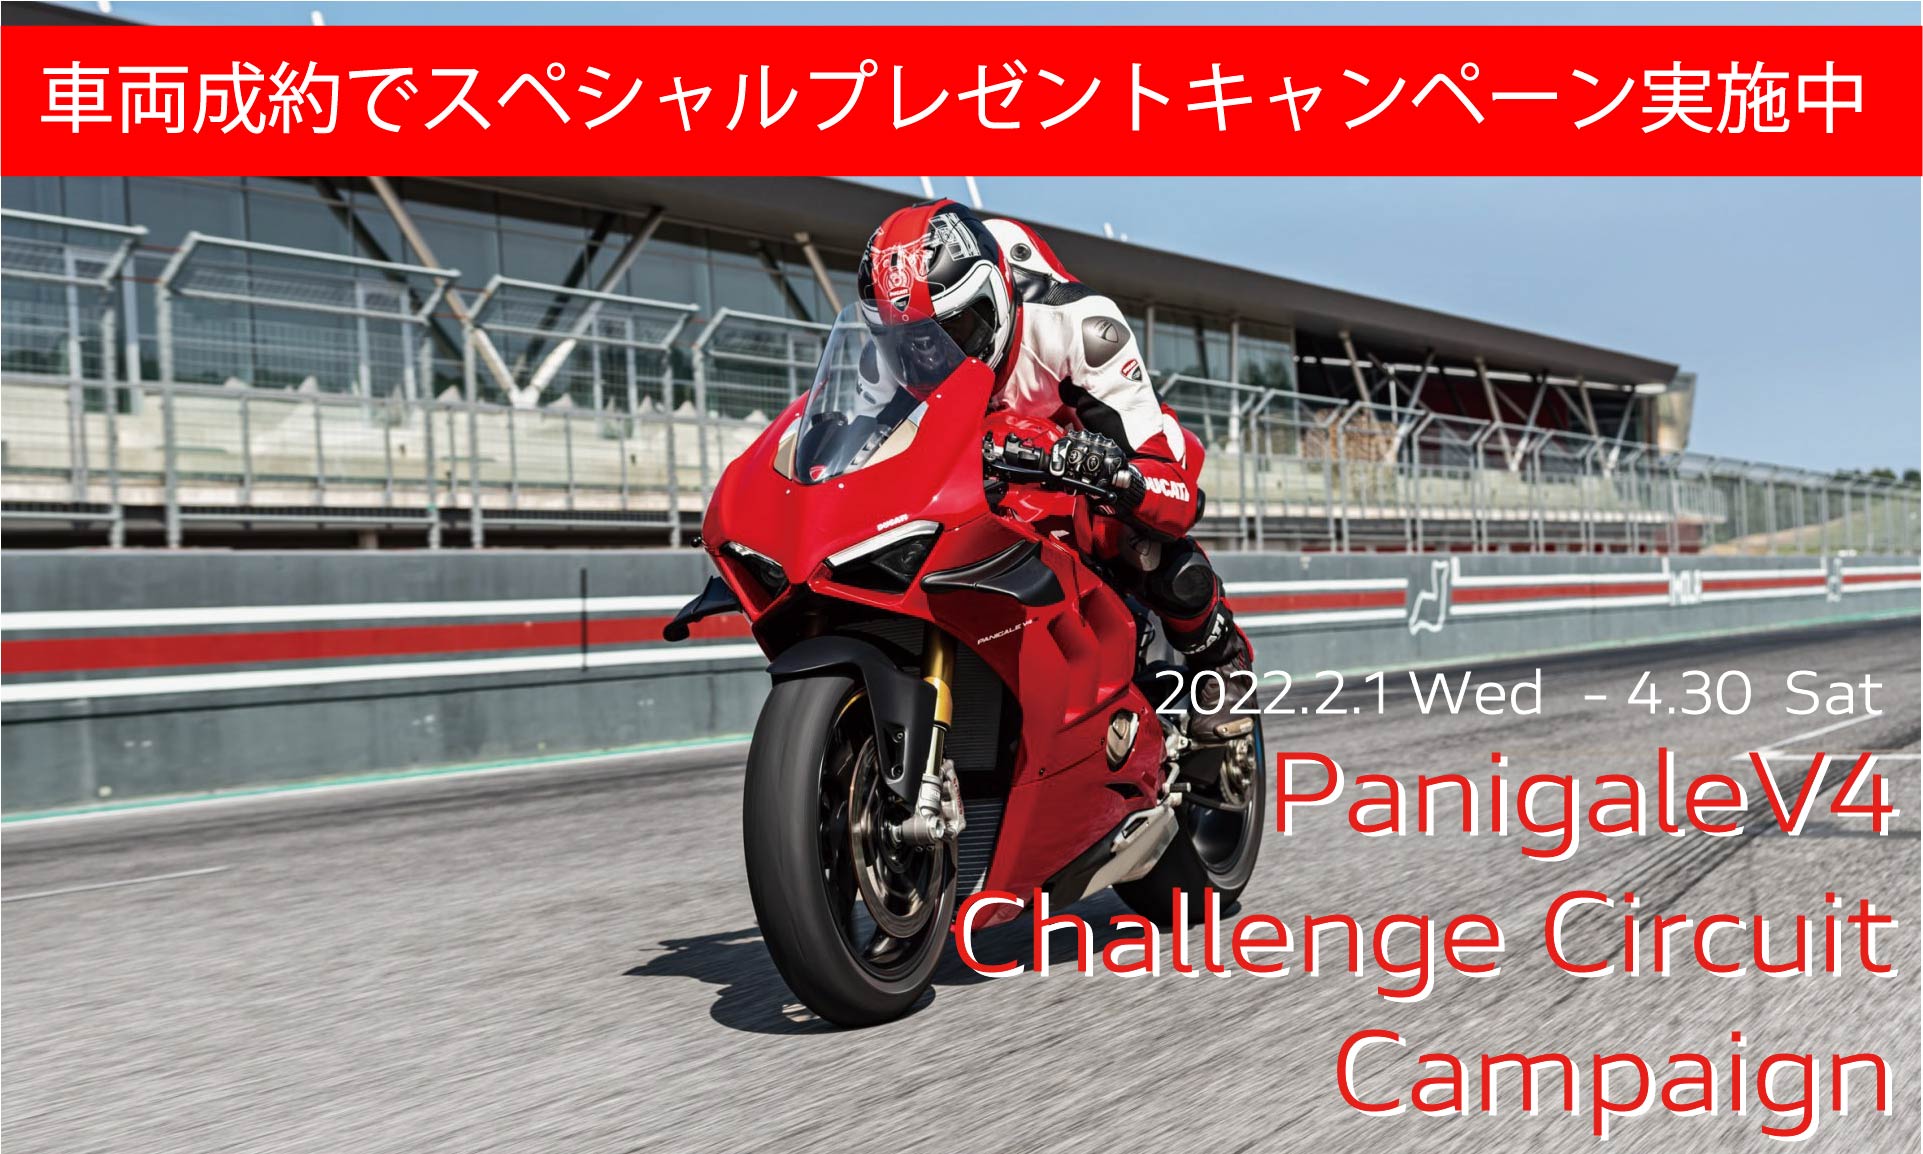 Panigale V4 Challenge Circuit Campaign